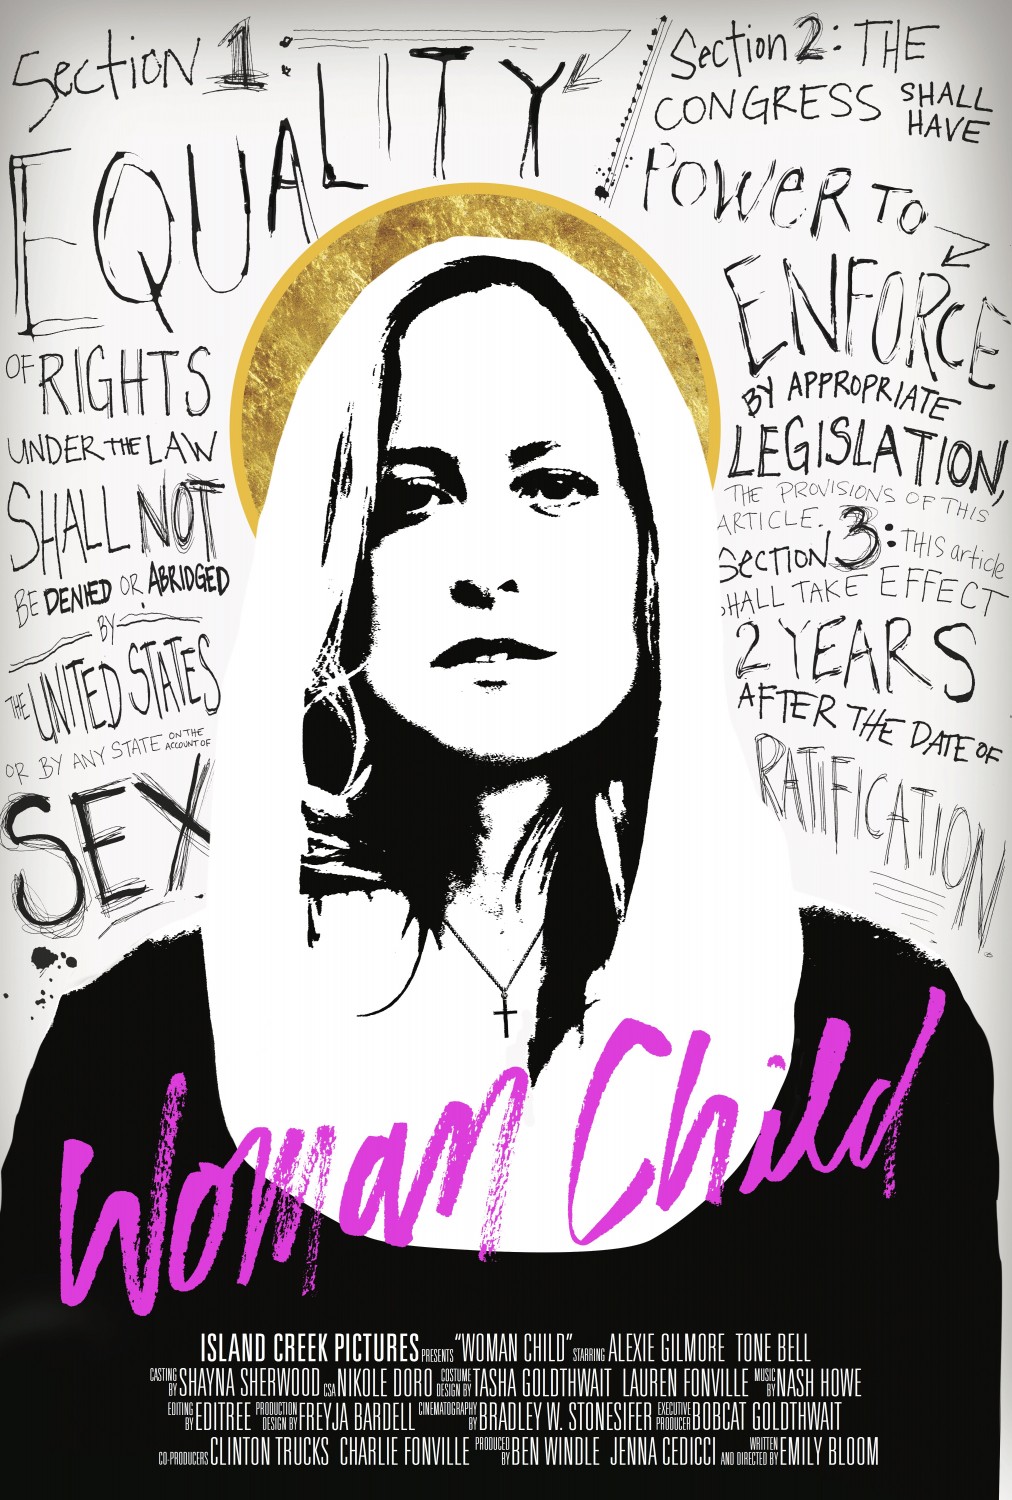 Extra Large Movie Poster Image for Woman Child